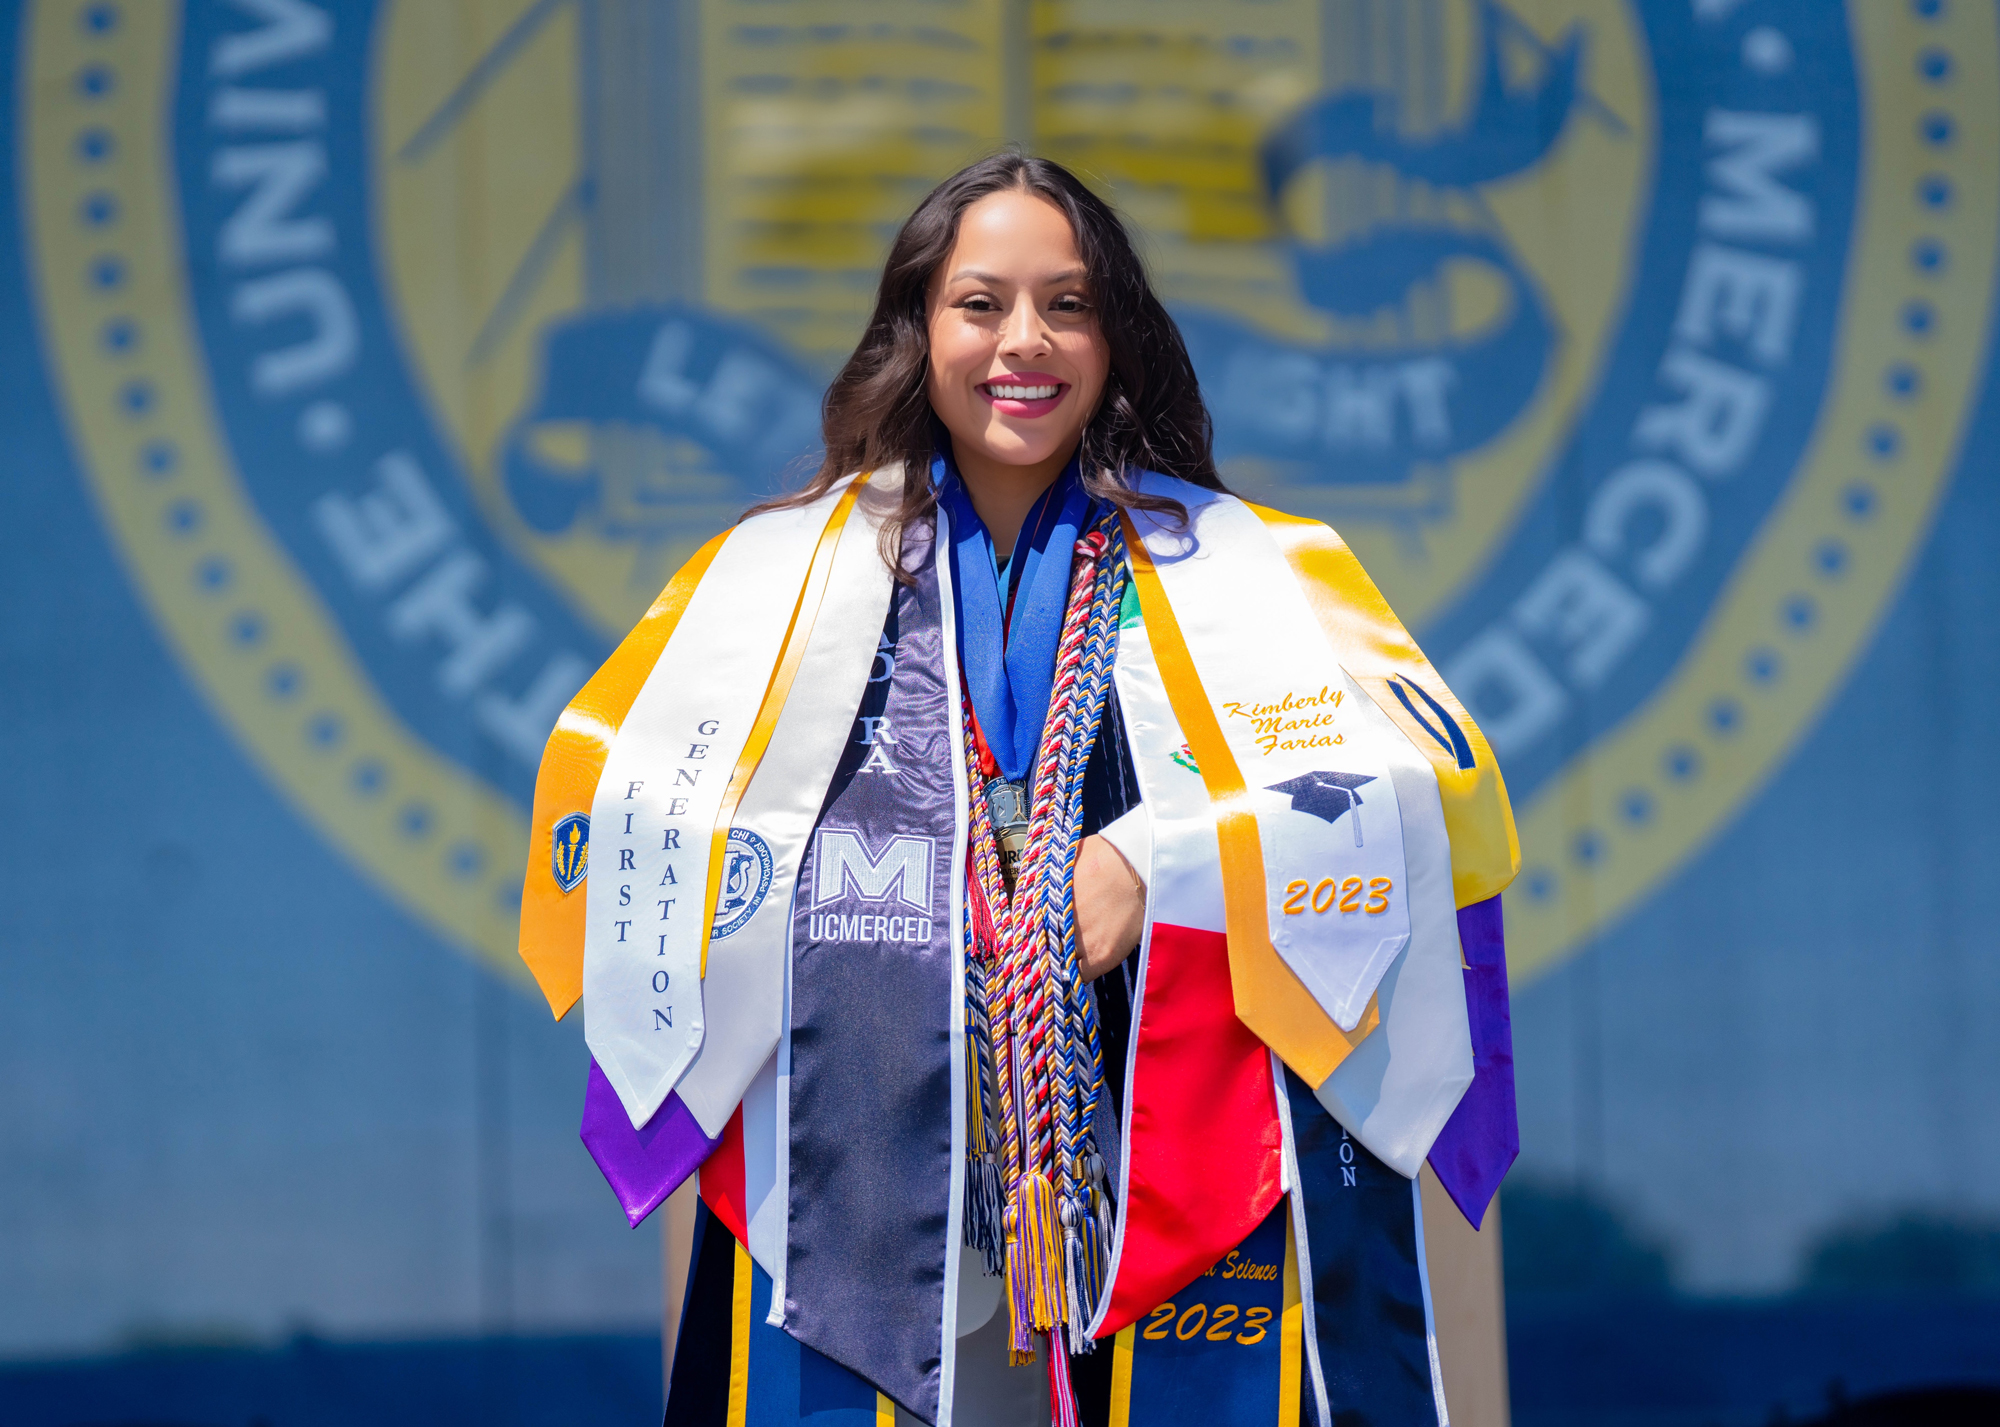 Kimberly Farias in her graduation gown with several stoles